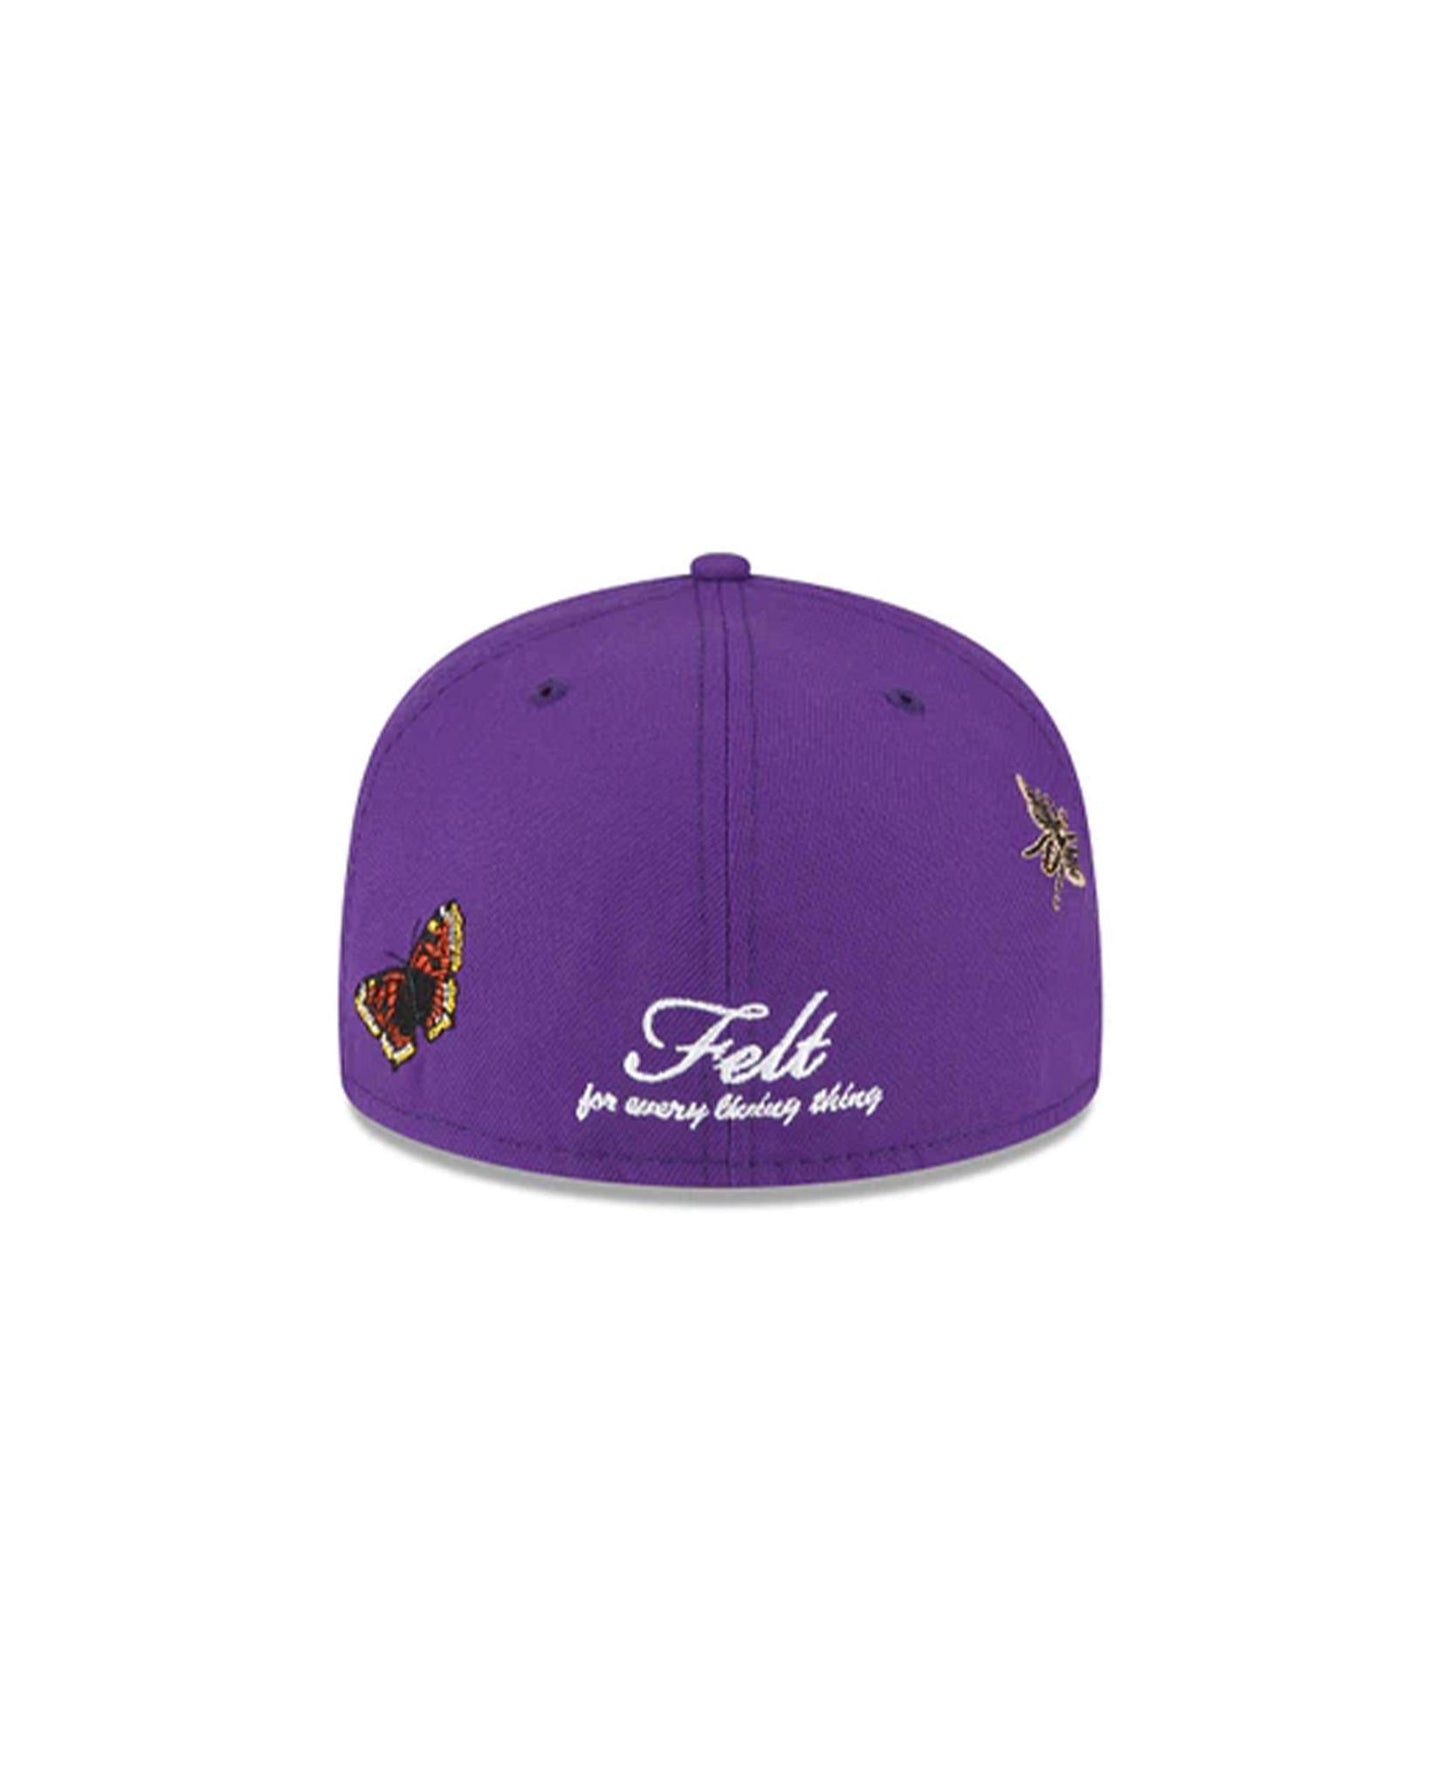 black fitted lakers hat